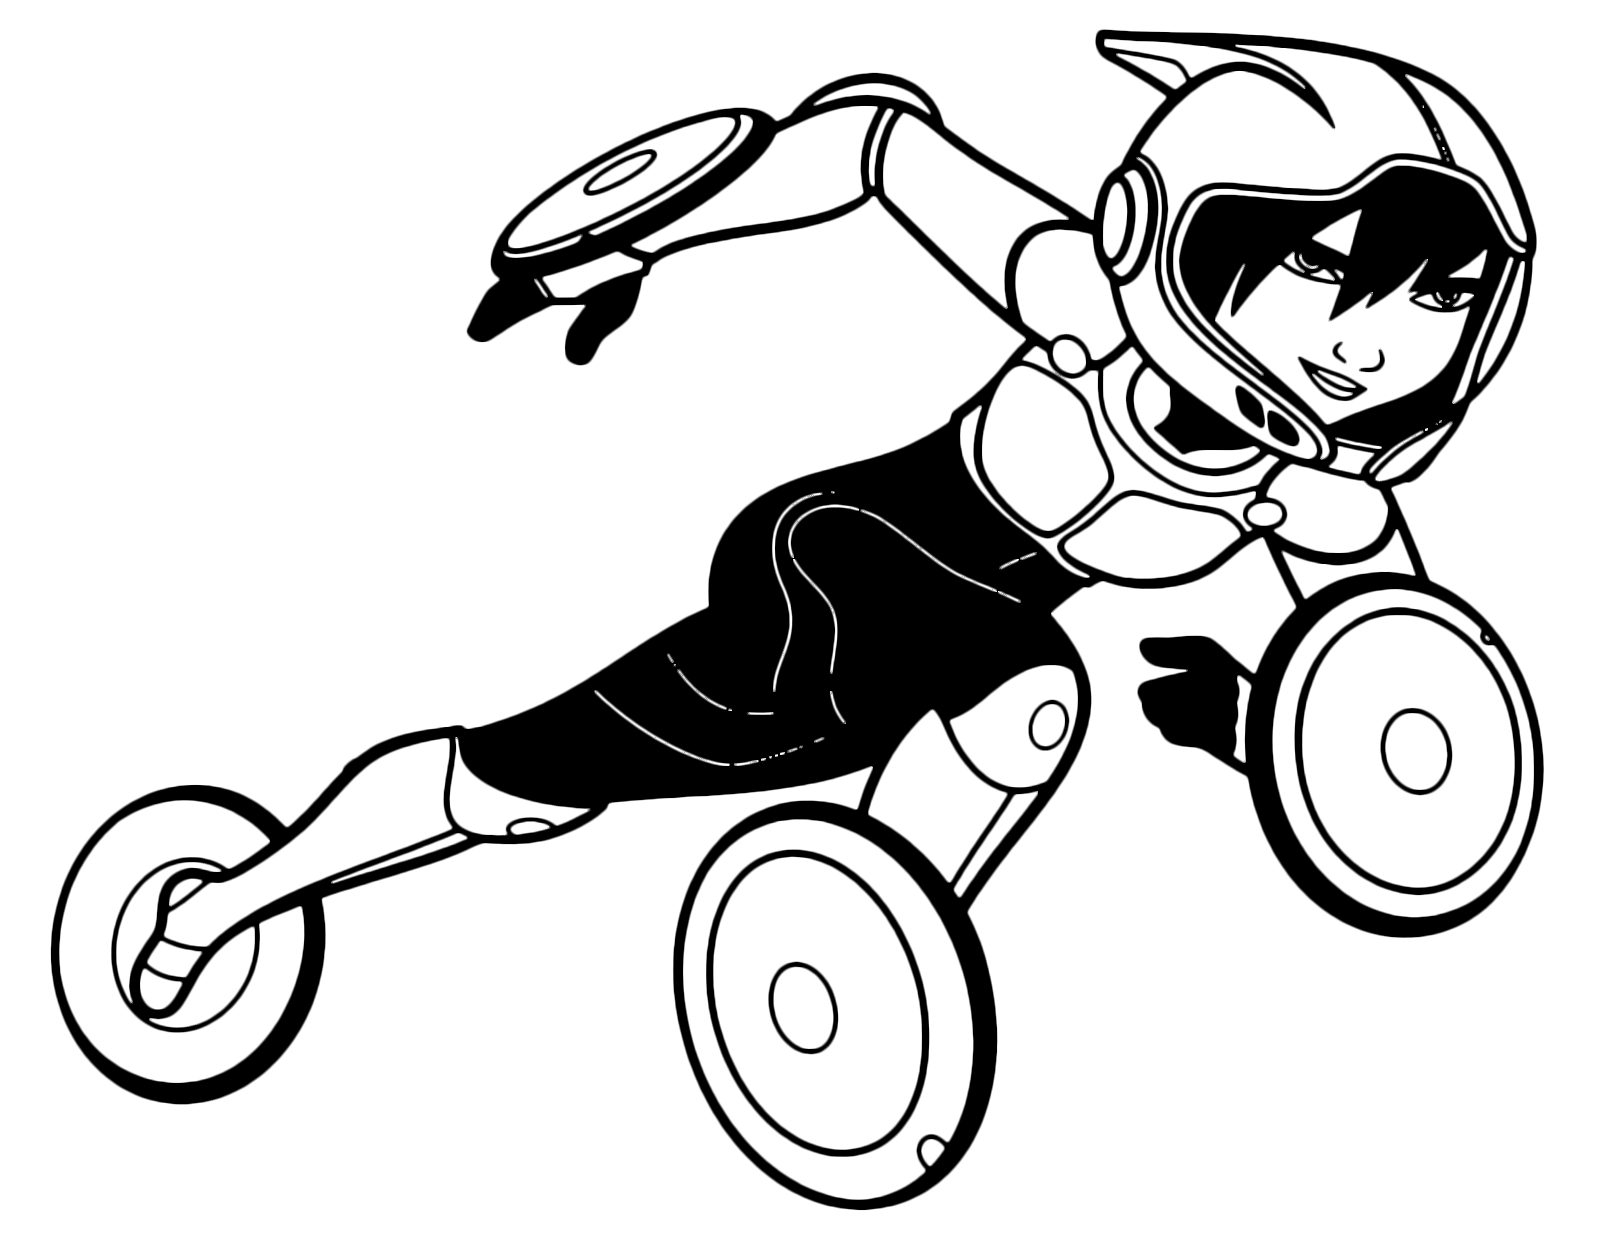 Big Hero 6 - GoGo Tomago with his costume with the wheels